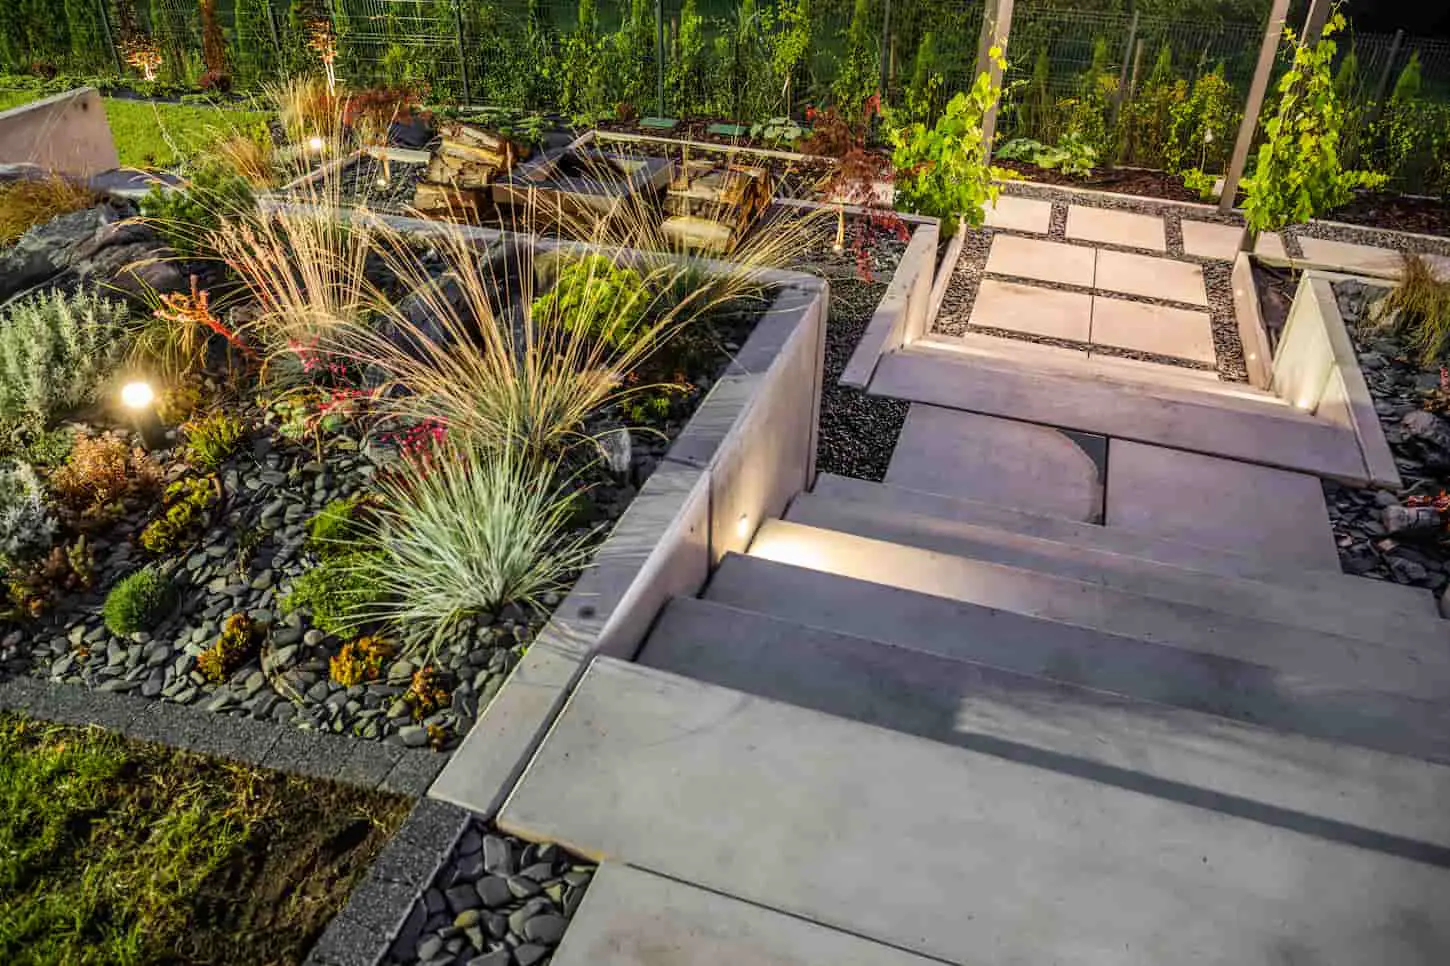 How to Turn a Concrete Yard Into a Garden: Here’s How